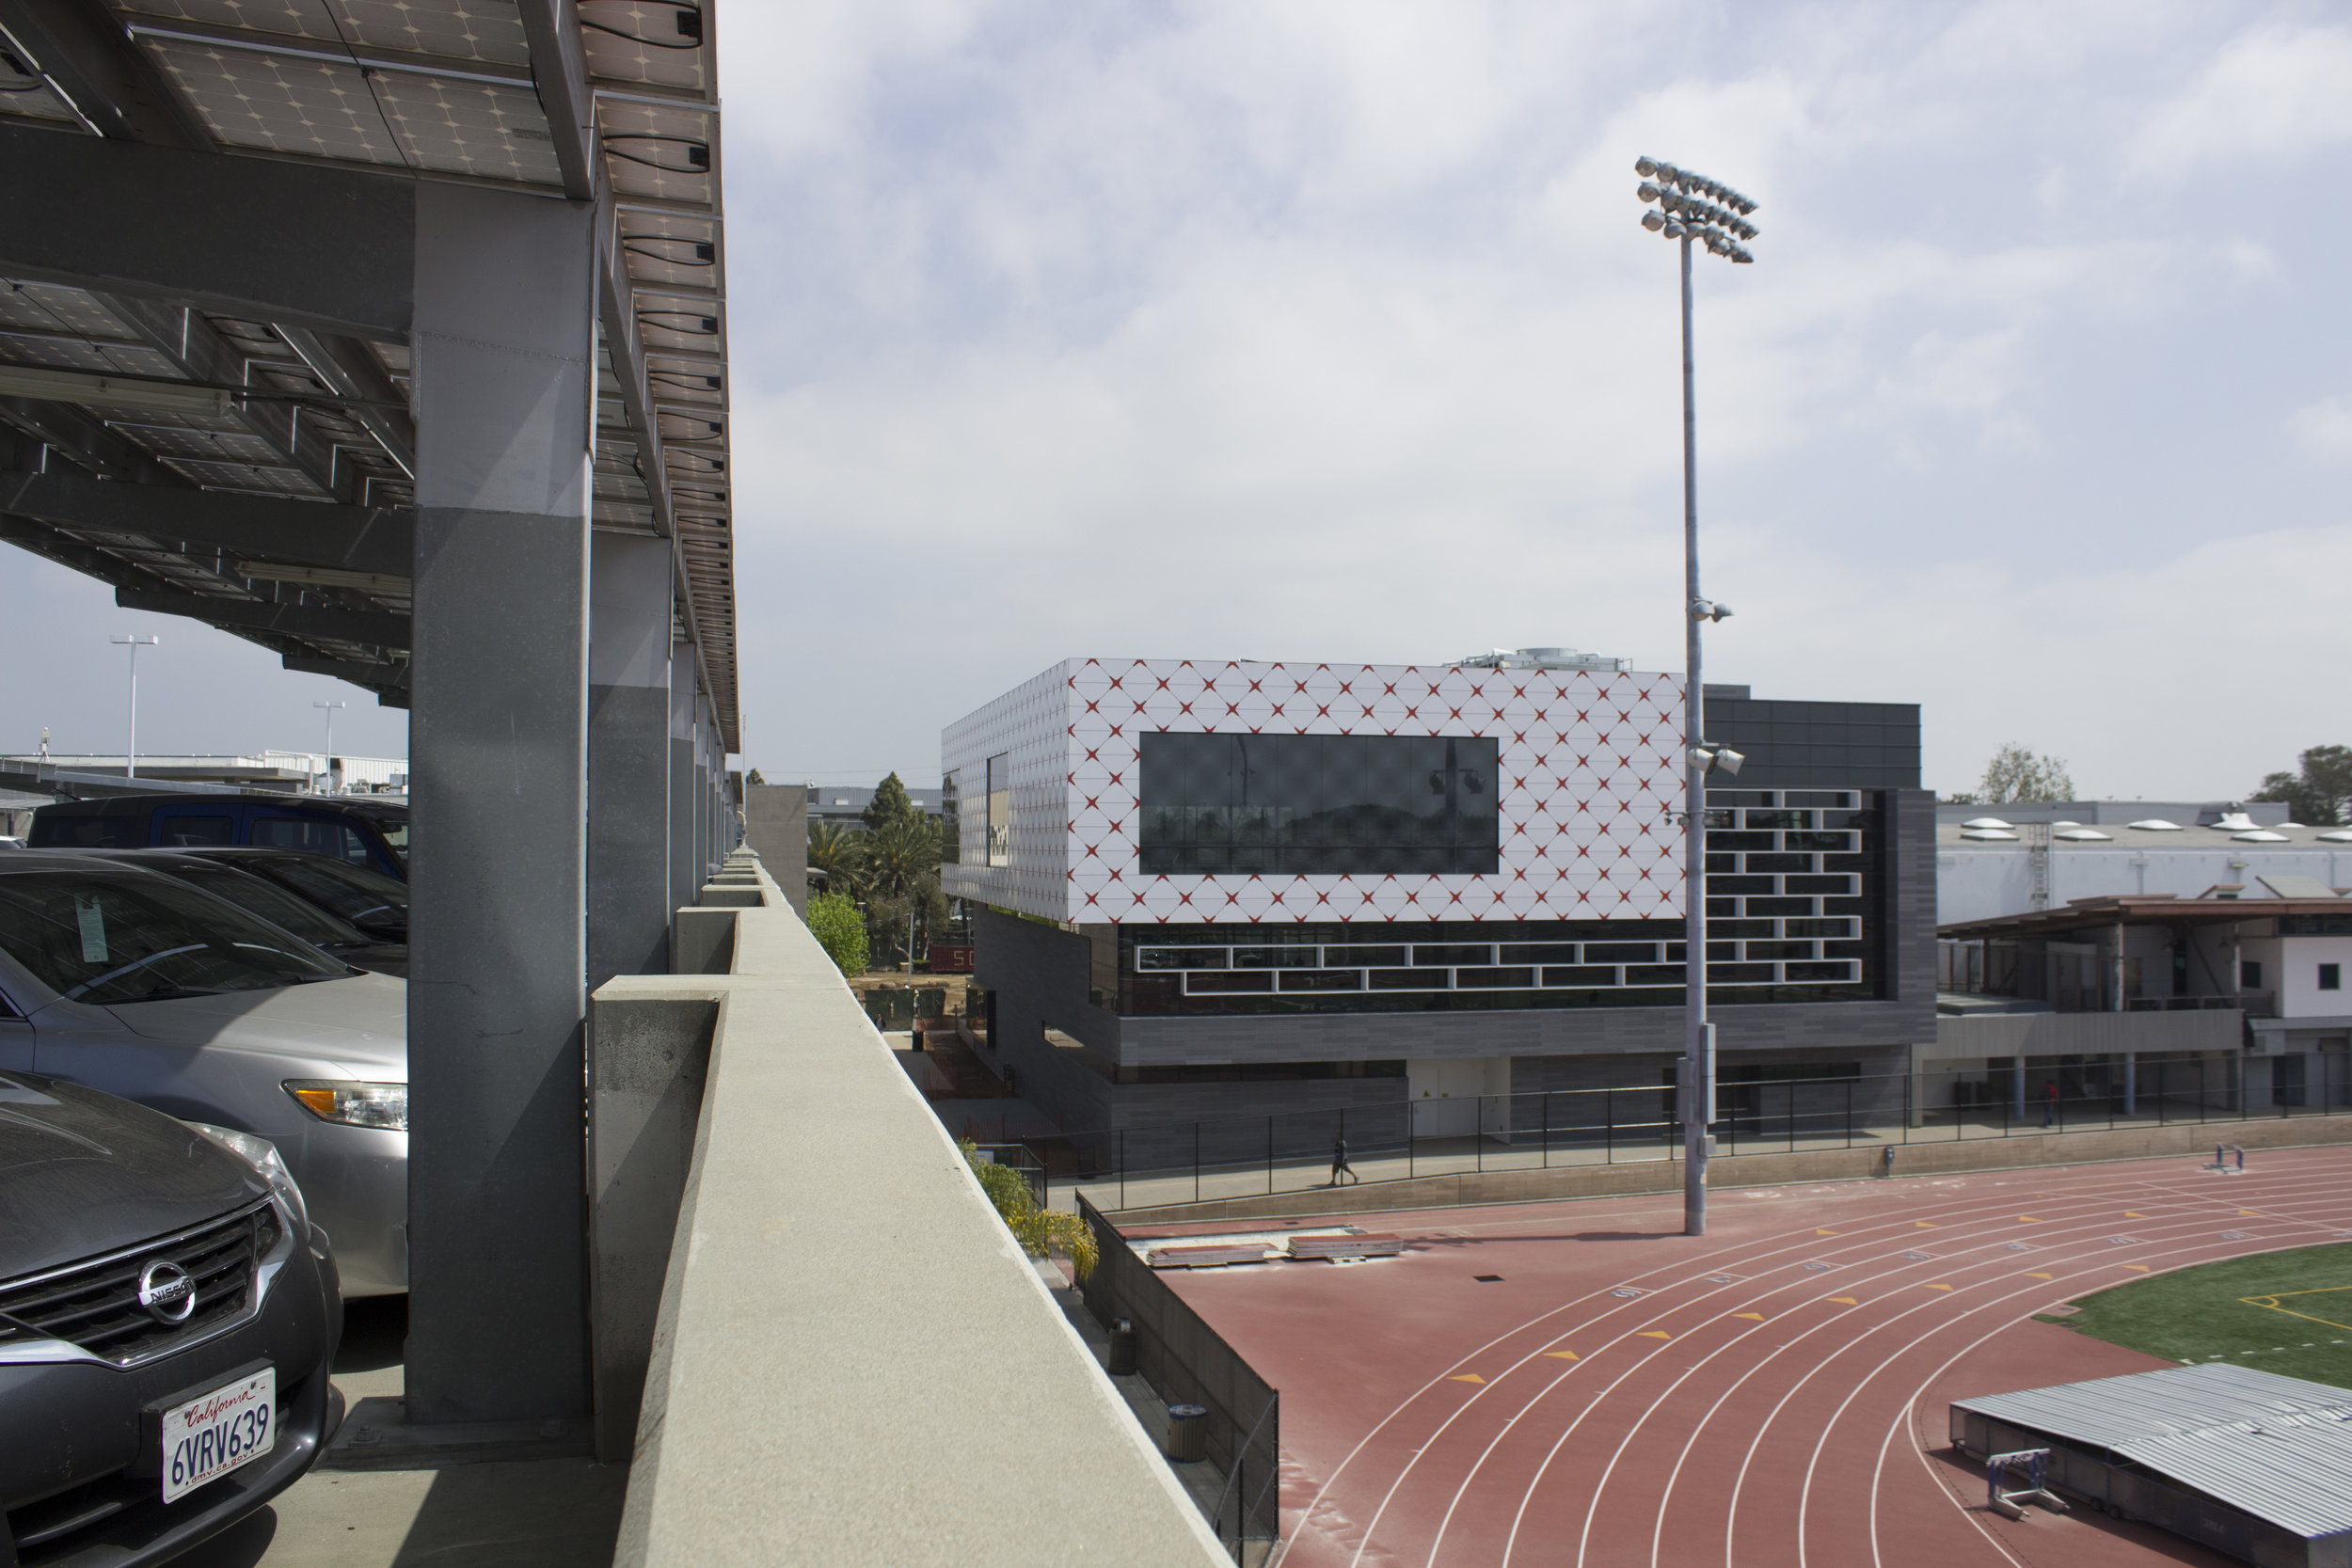  All new Core Performance Center building, at Santa Monica College, Calif. Photo taken on April 3, 2017. Emeline Moquillon, staff photographer 